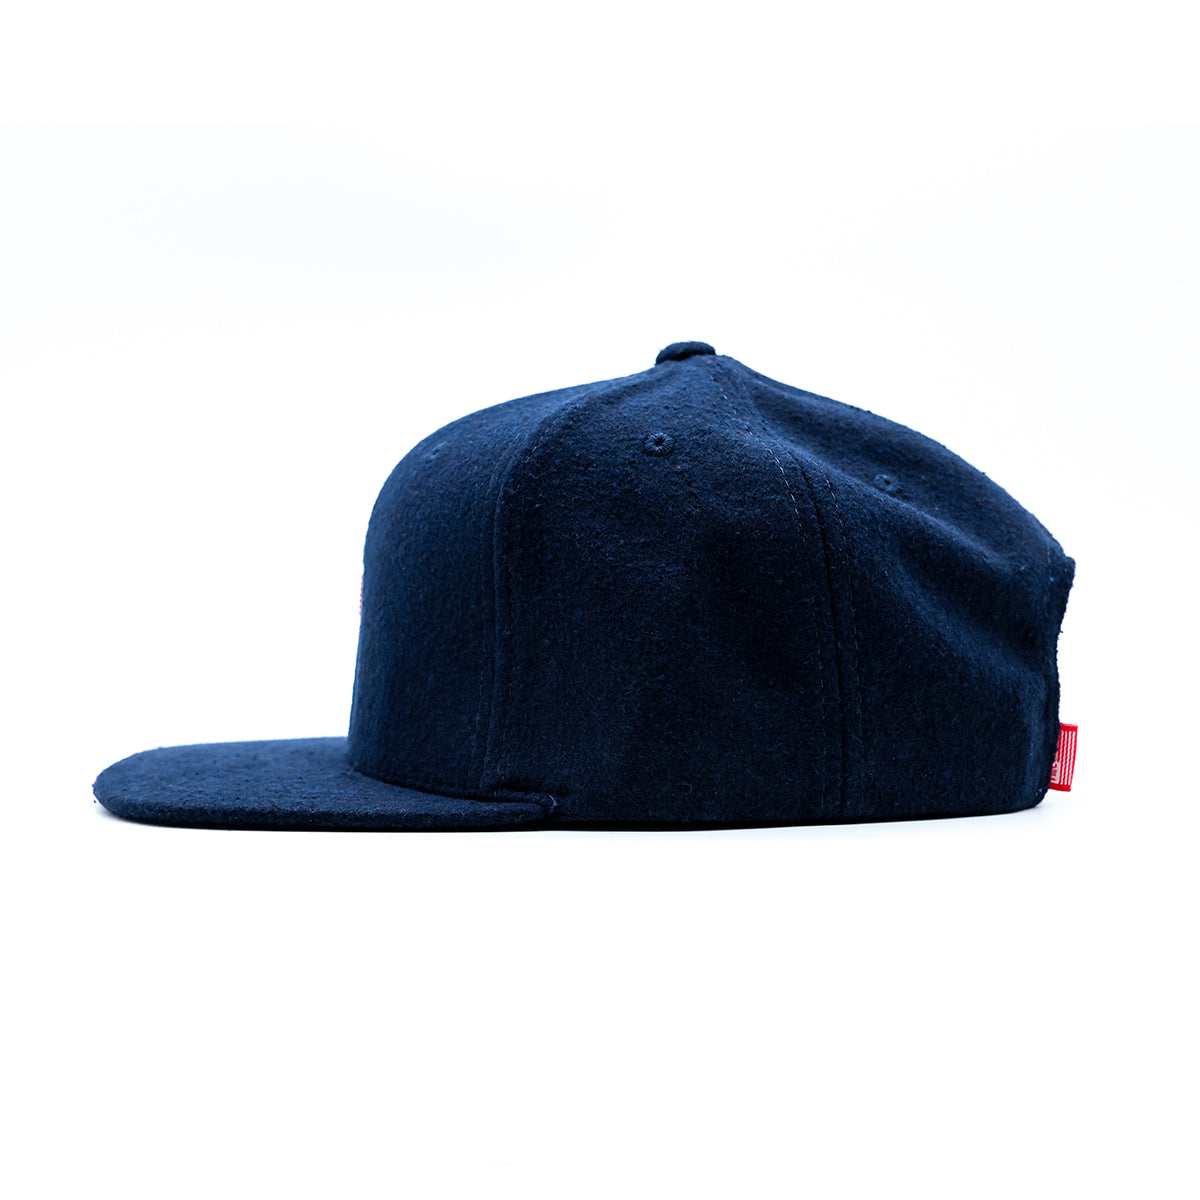 TMC Flag Limited Edition Snapback - Navy Wool - Side